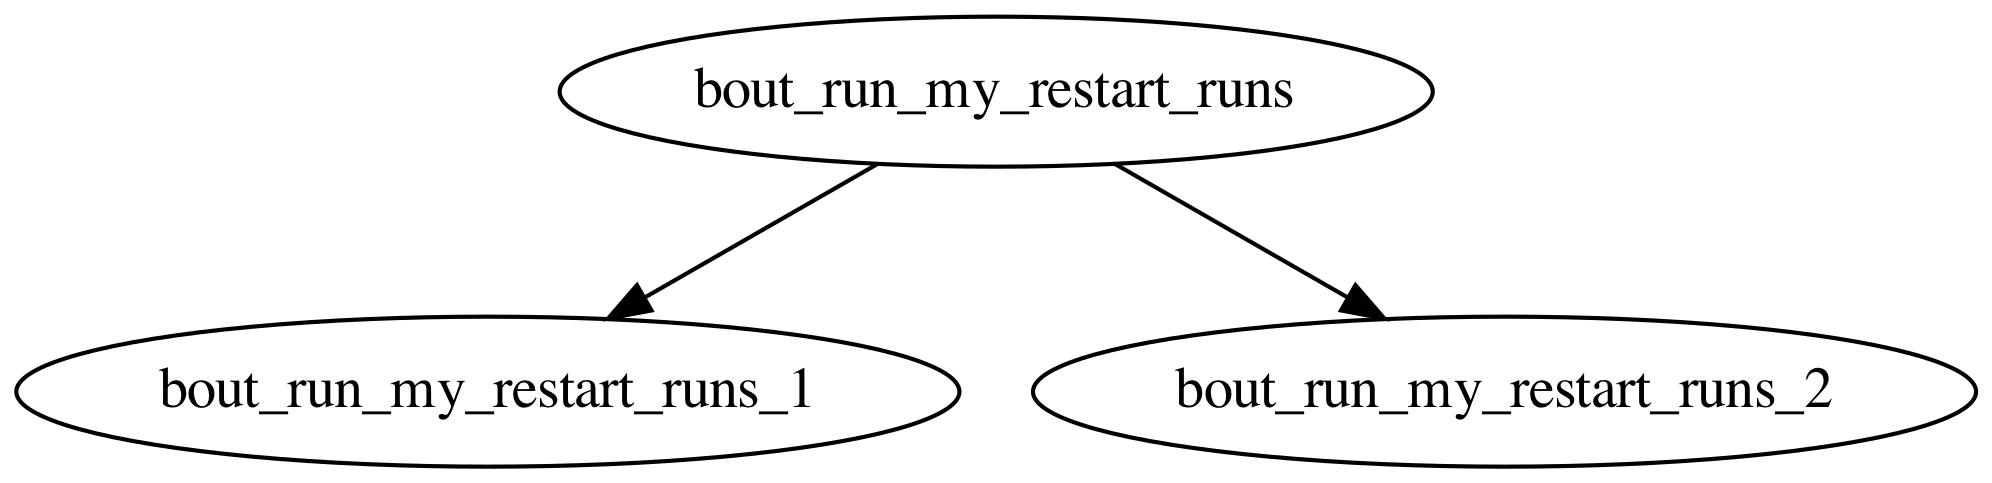 Graph of chained restarts